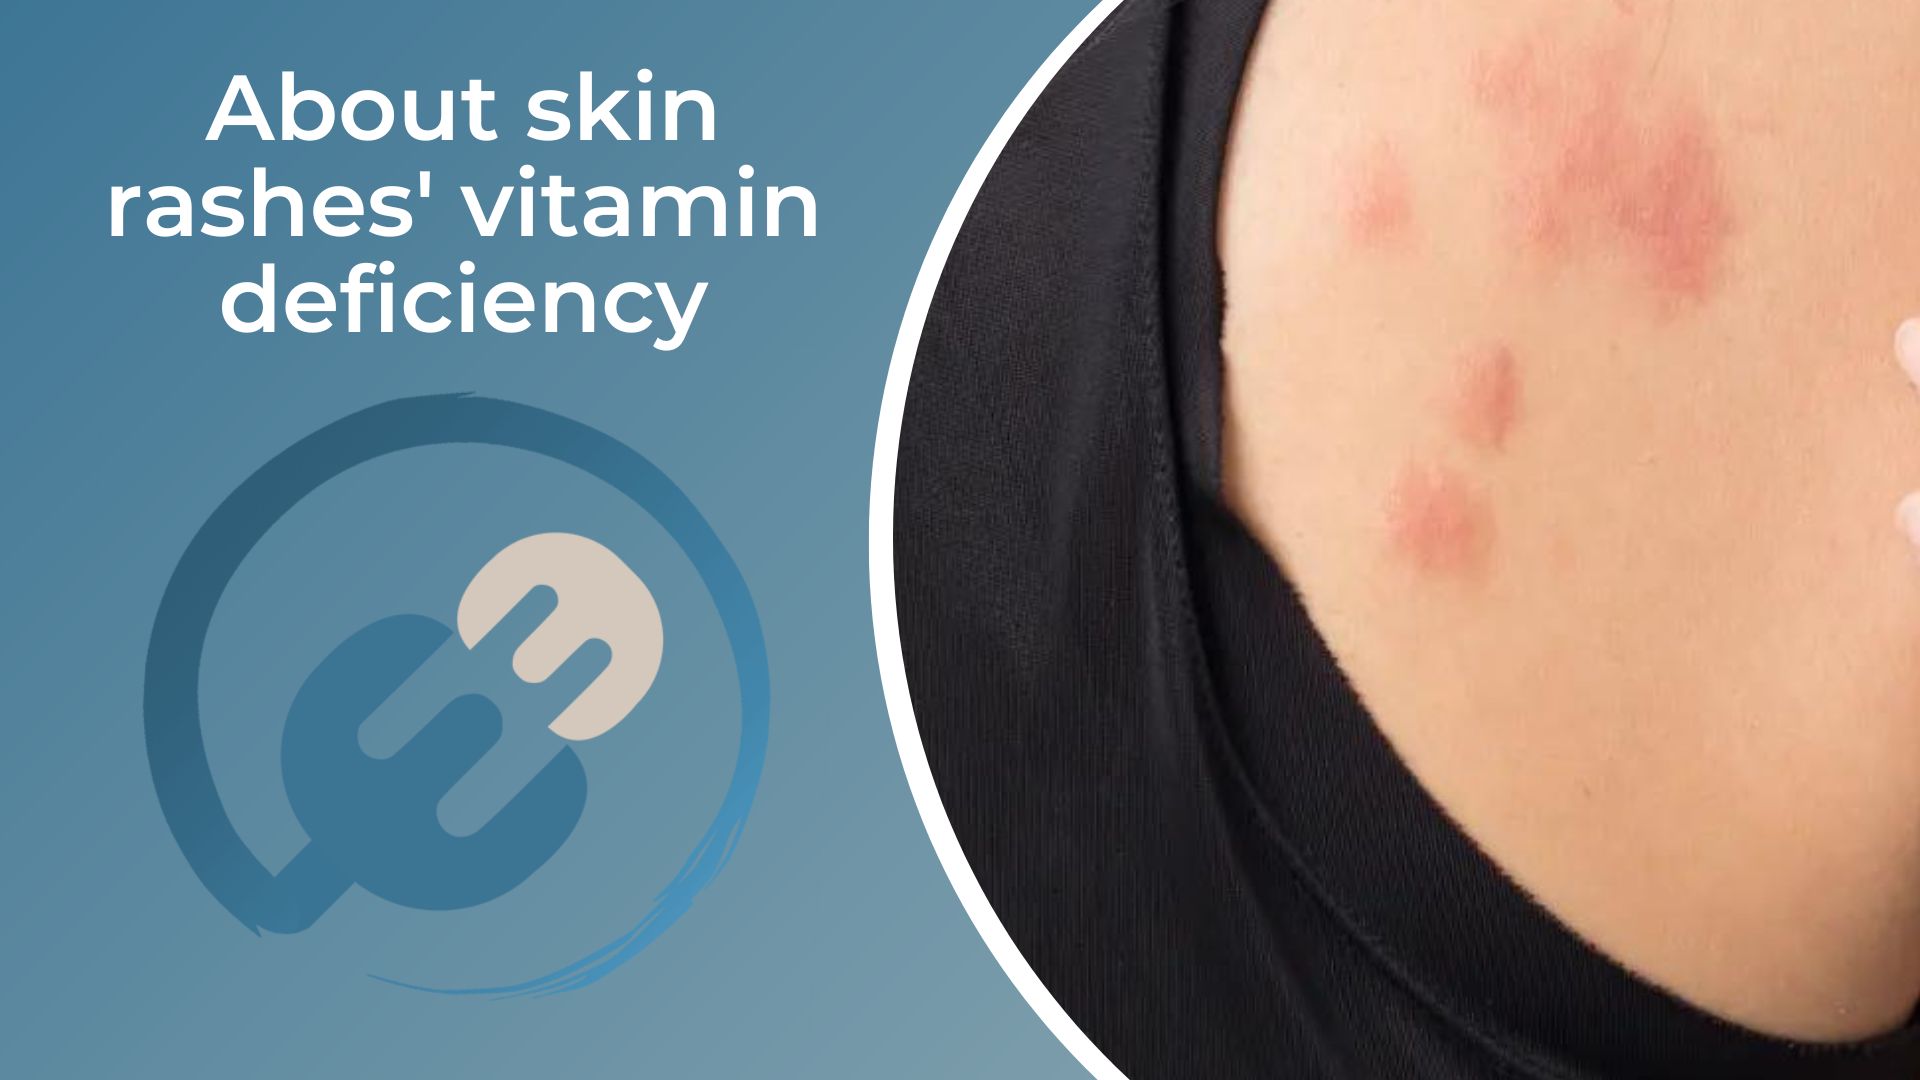 About skin rashes' vitamin deficiency